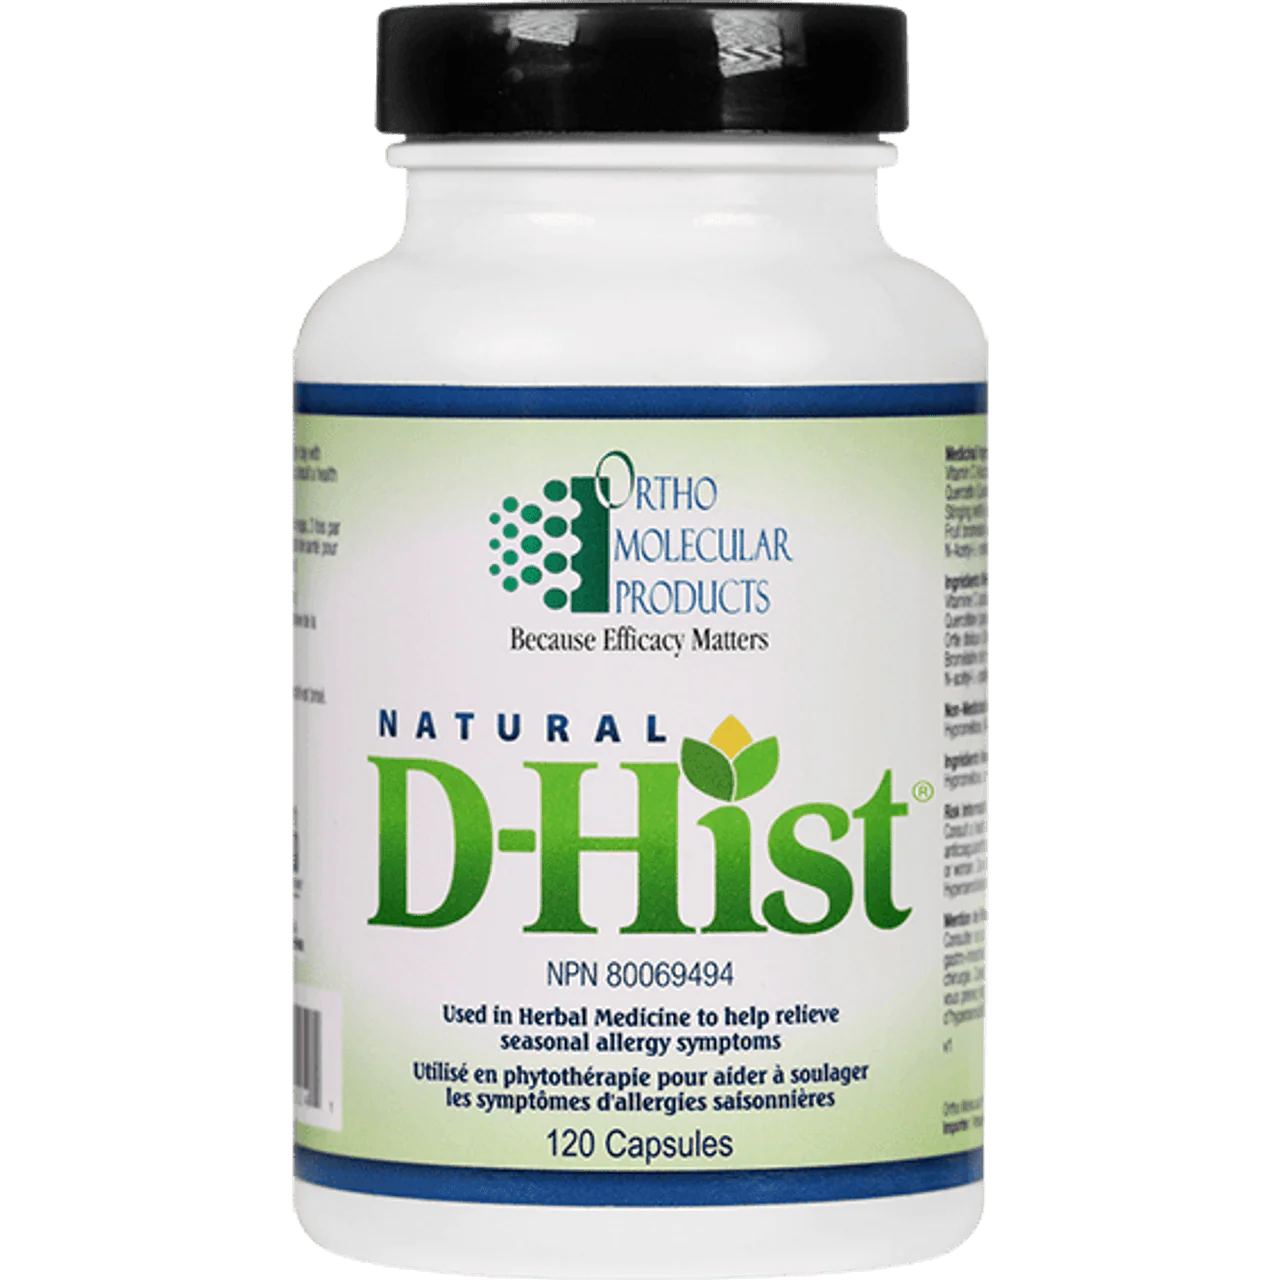 D-HIST 120 cap, support for seasonal allergens. ORTHO MOLECULAR PRODUCTS